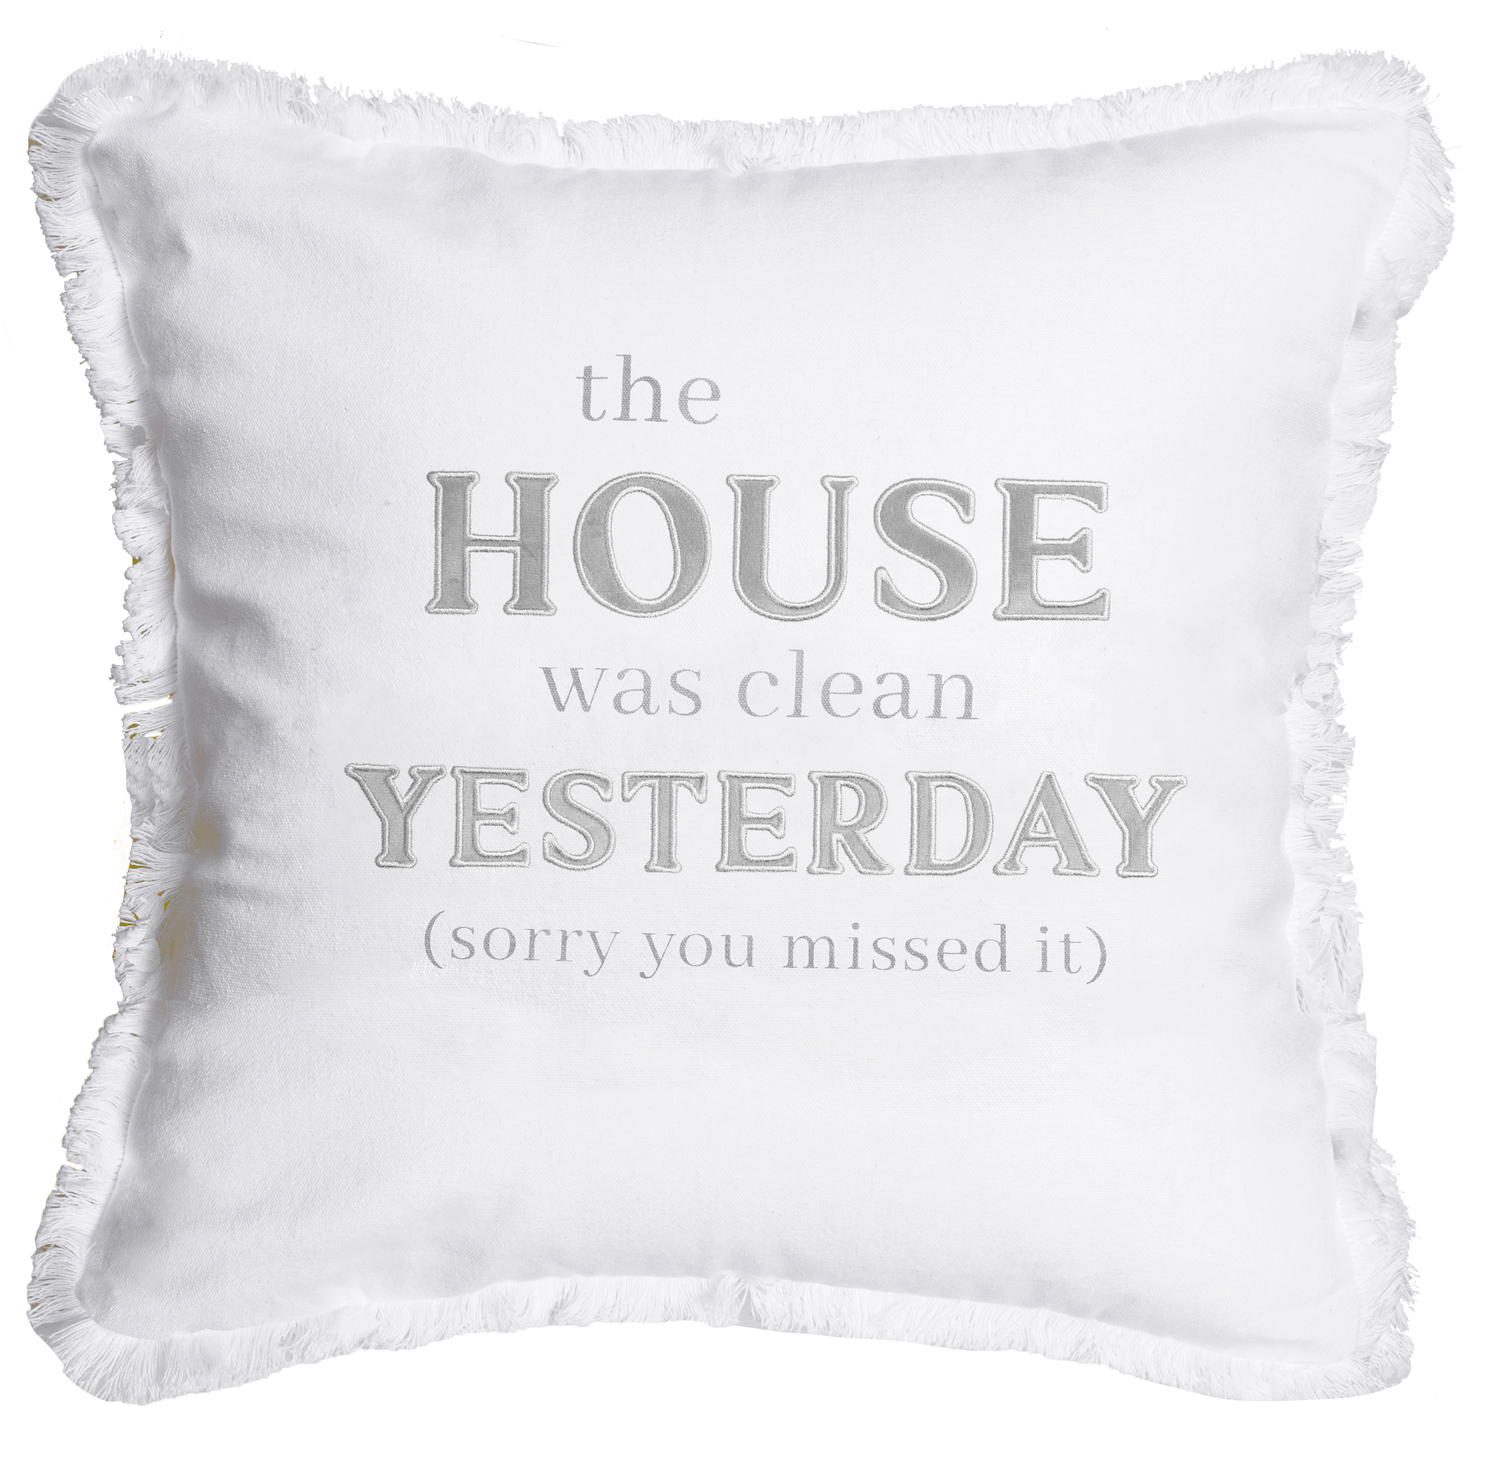 Yesterday by Tossing Words Around - Yesterday - 18" Throw Pillow Cover